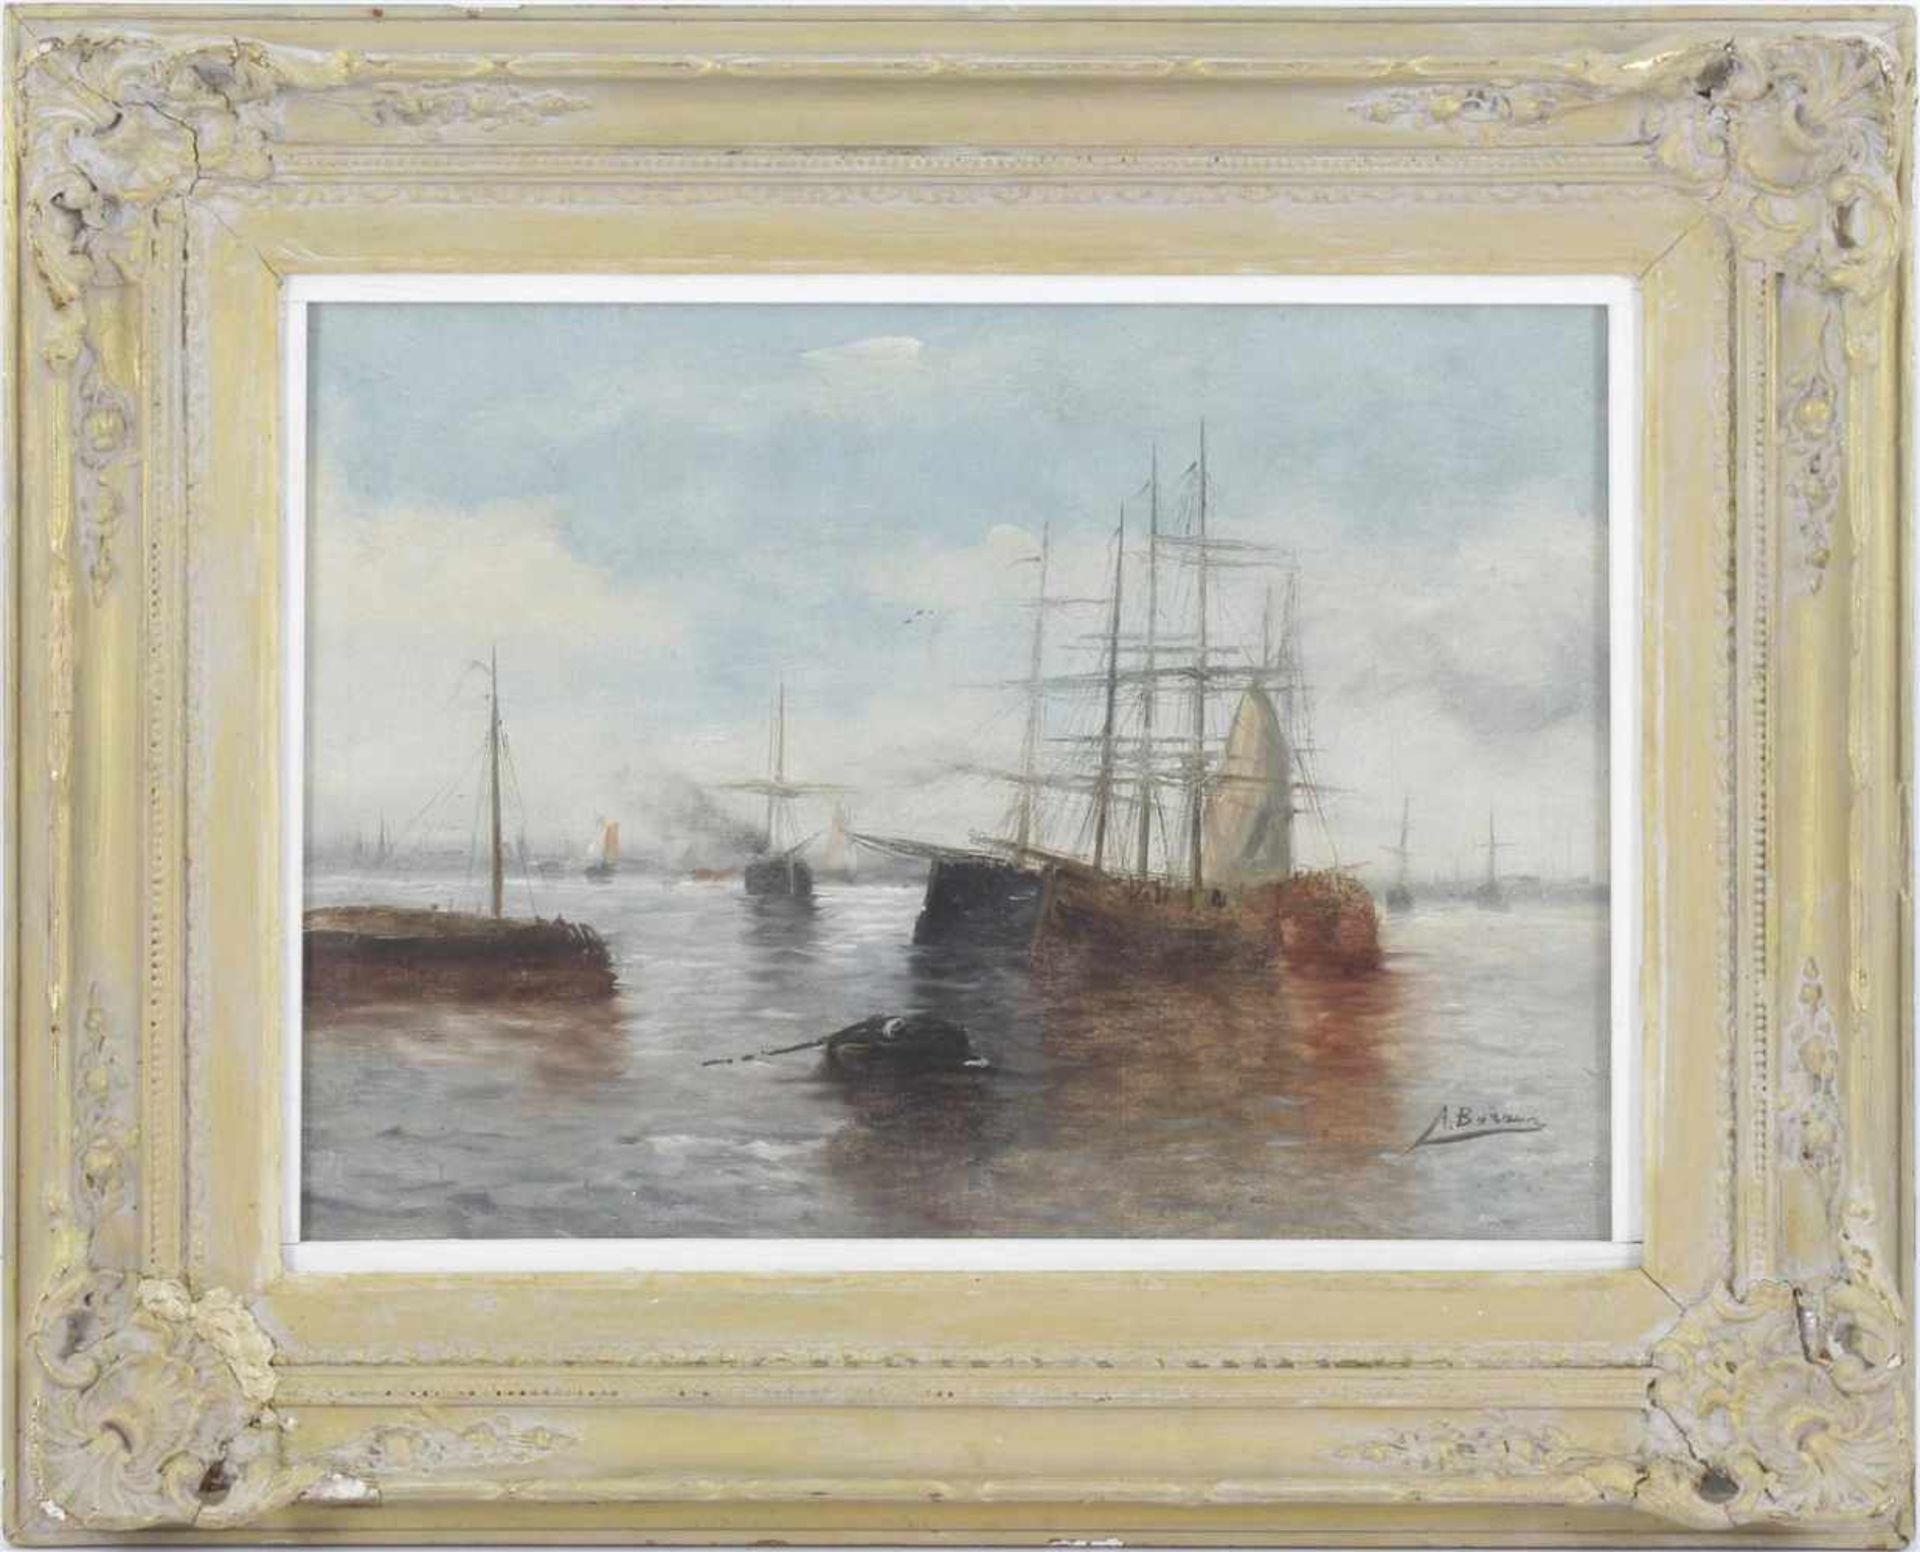 Unclearly signed, Breton harbor with many ships, canvas 35x50 cm